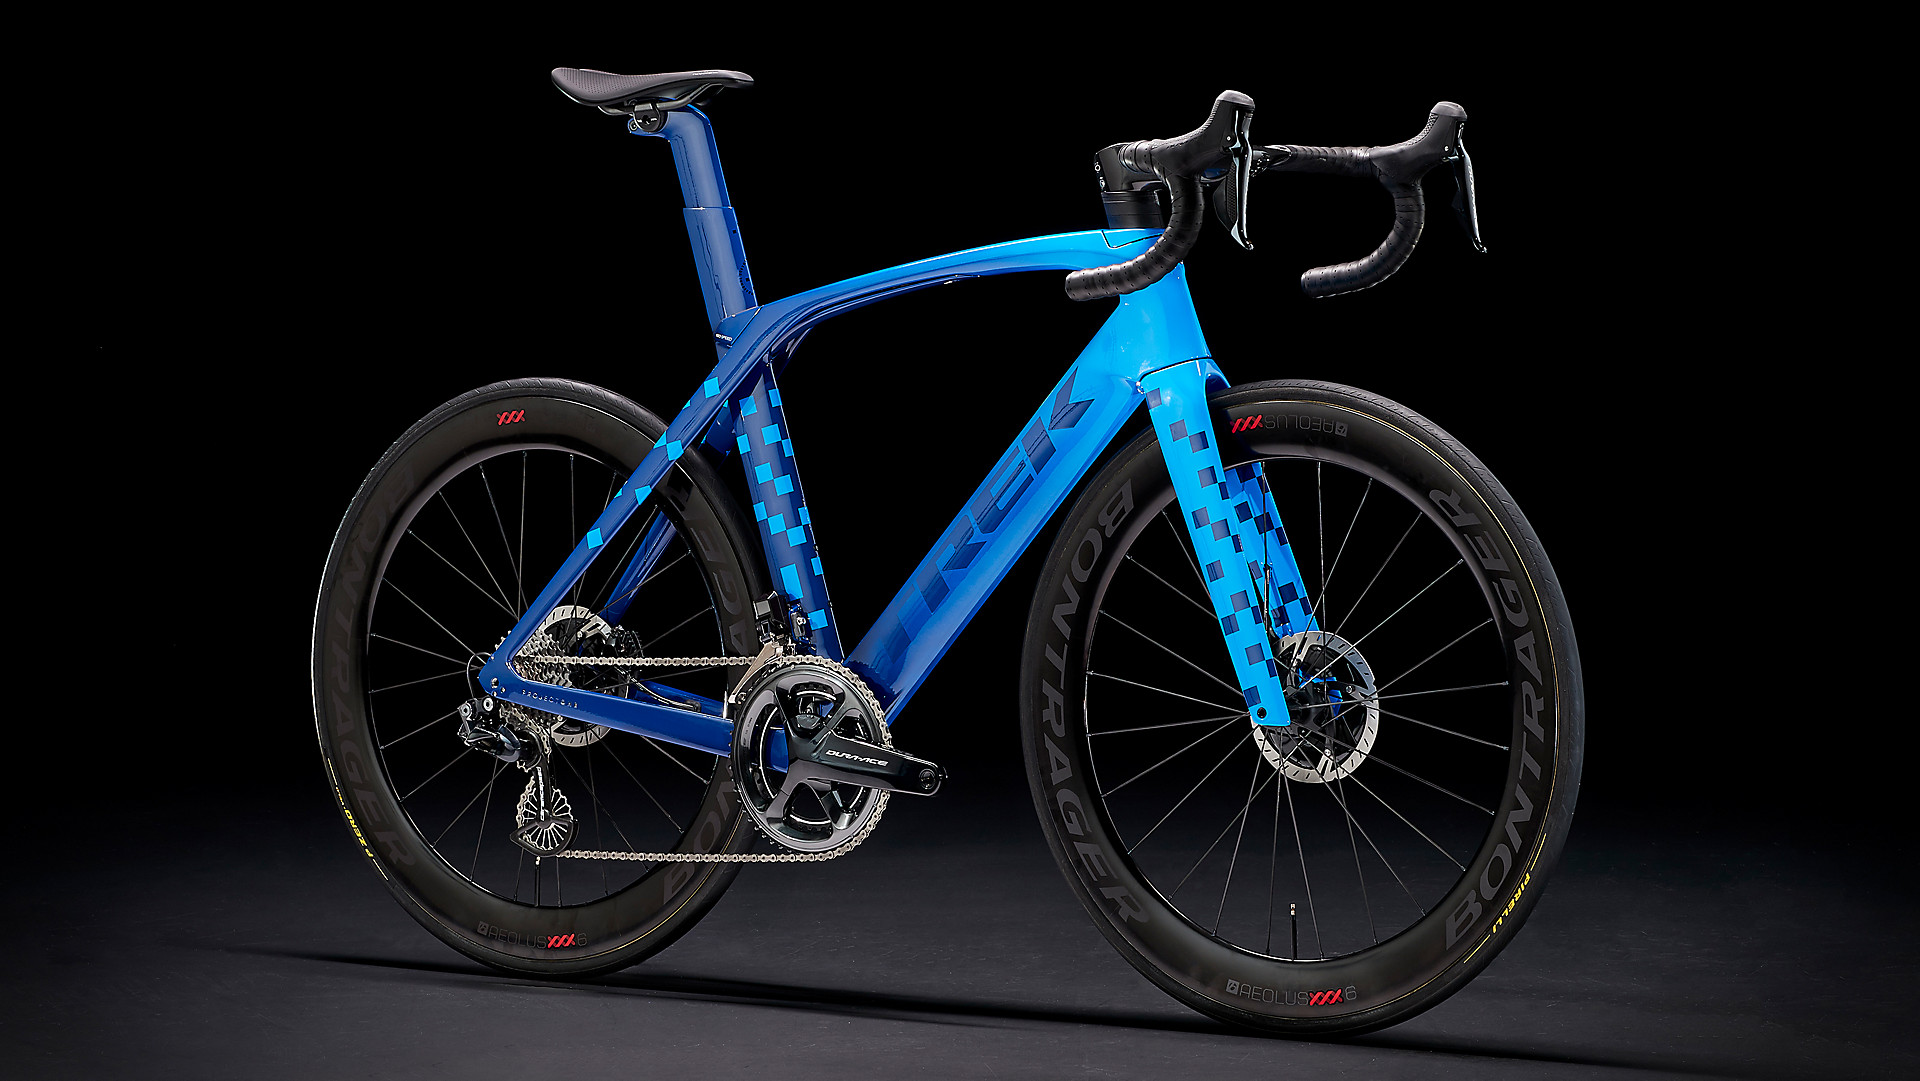 A Project One Ultimate Trek Madone with custom blue fade and checkered design.